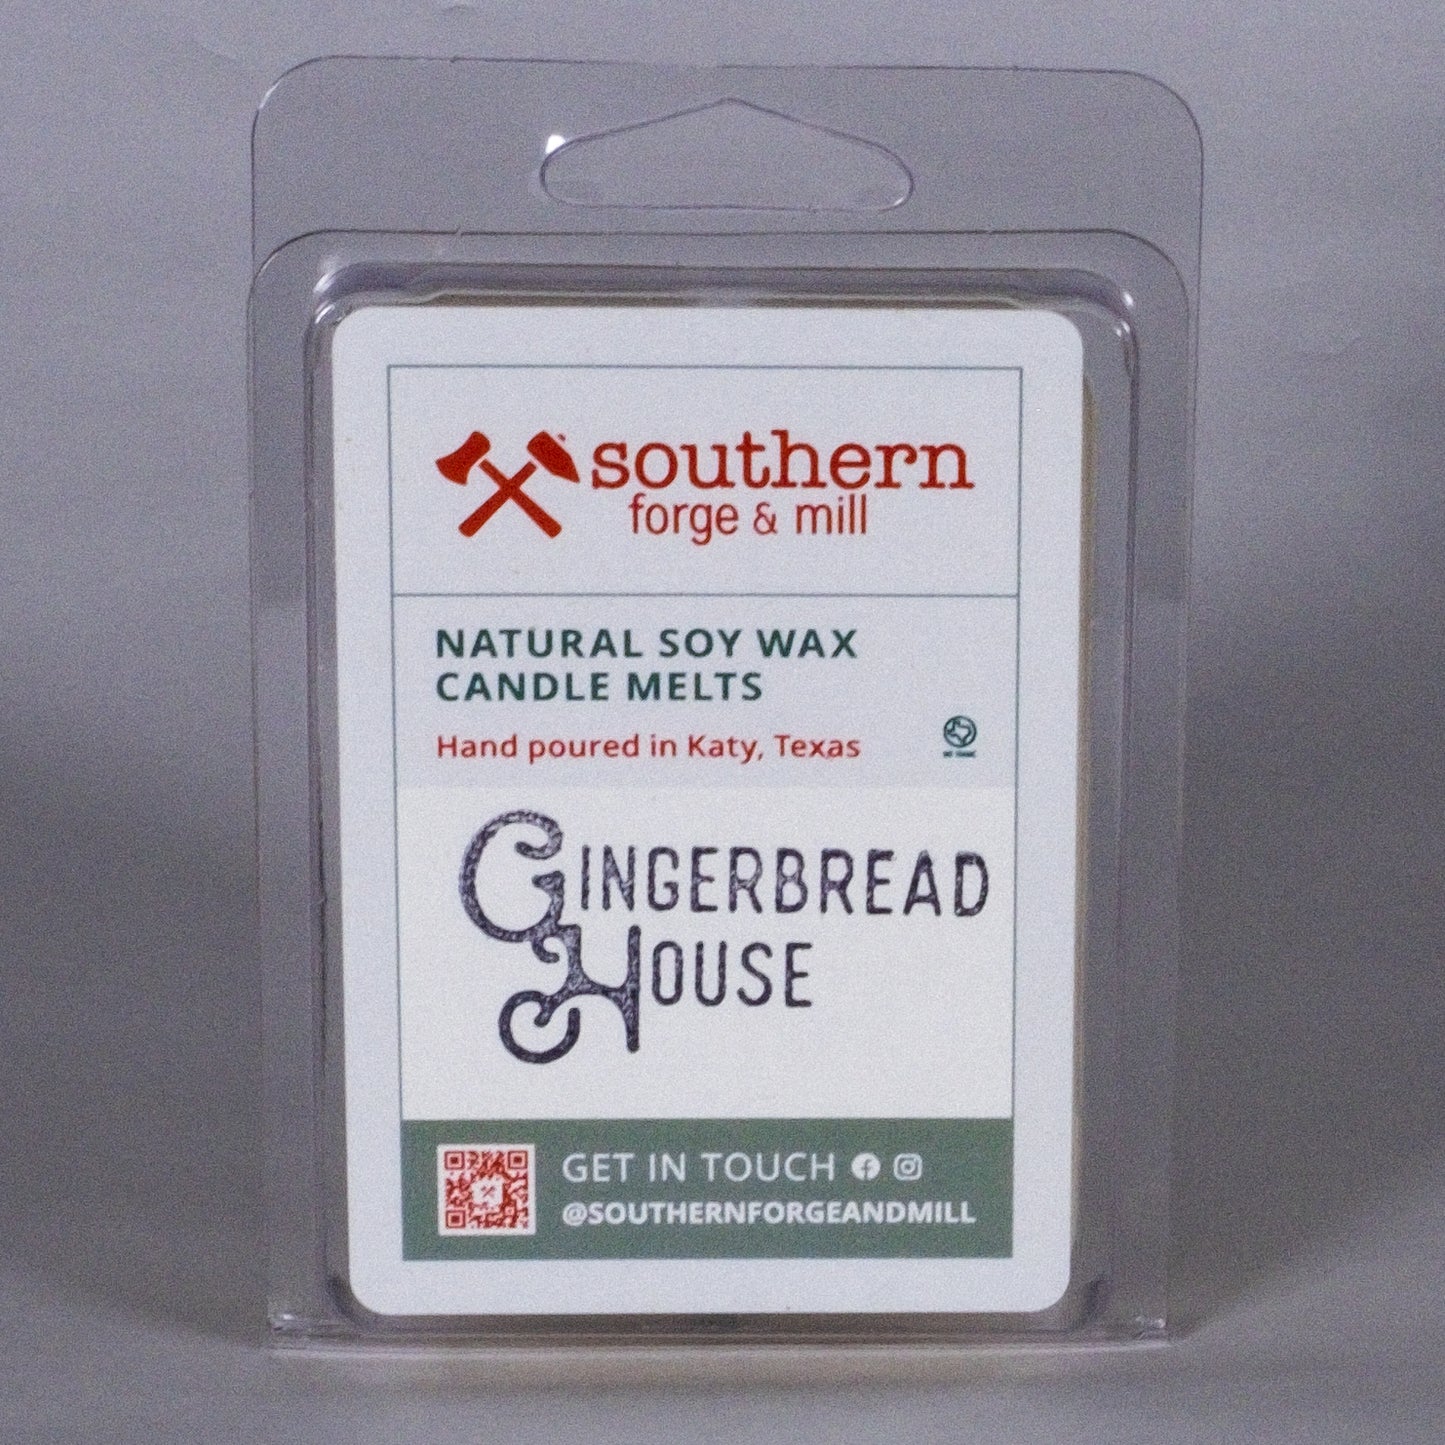 Gingerbread House Soy Candle